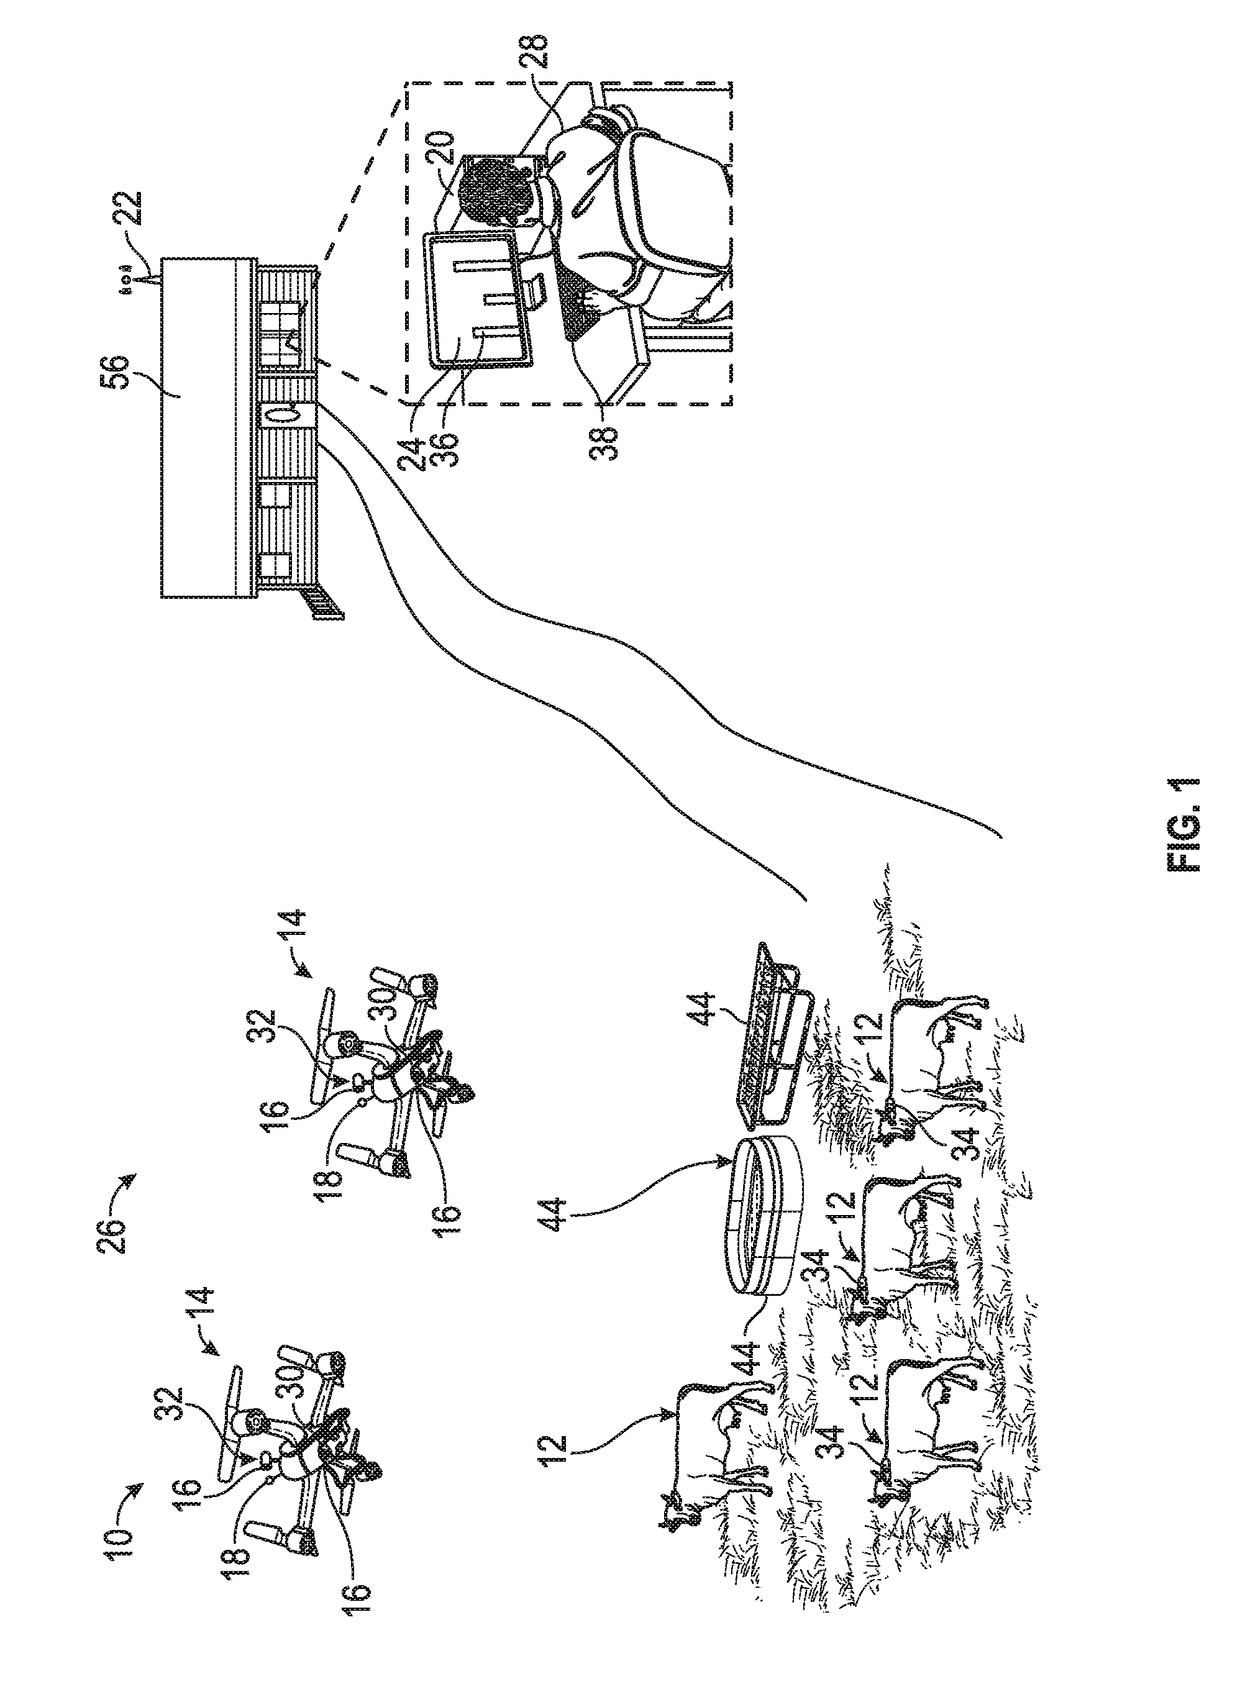 Unmanned livestock monitoring system and methods of use